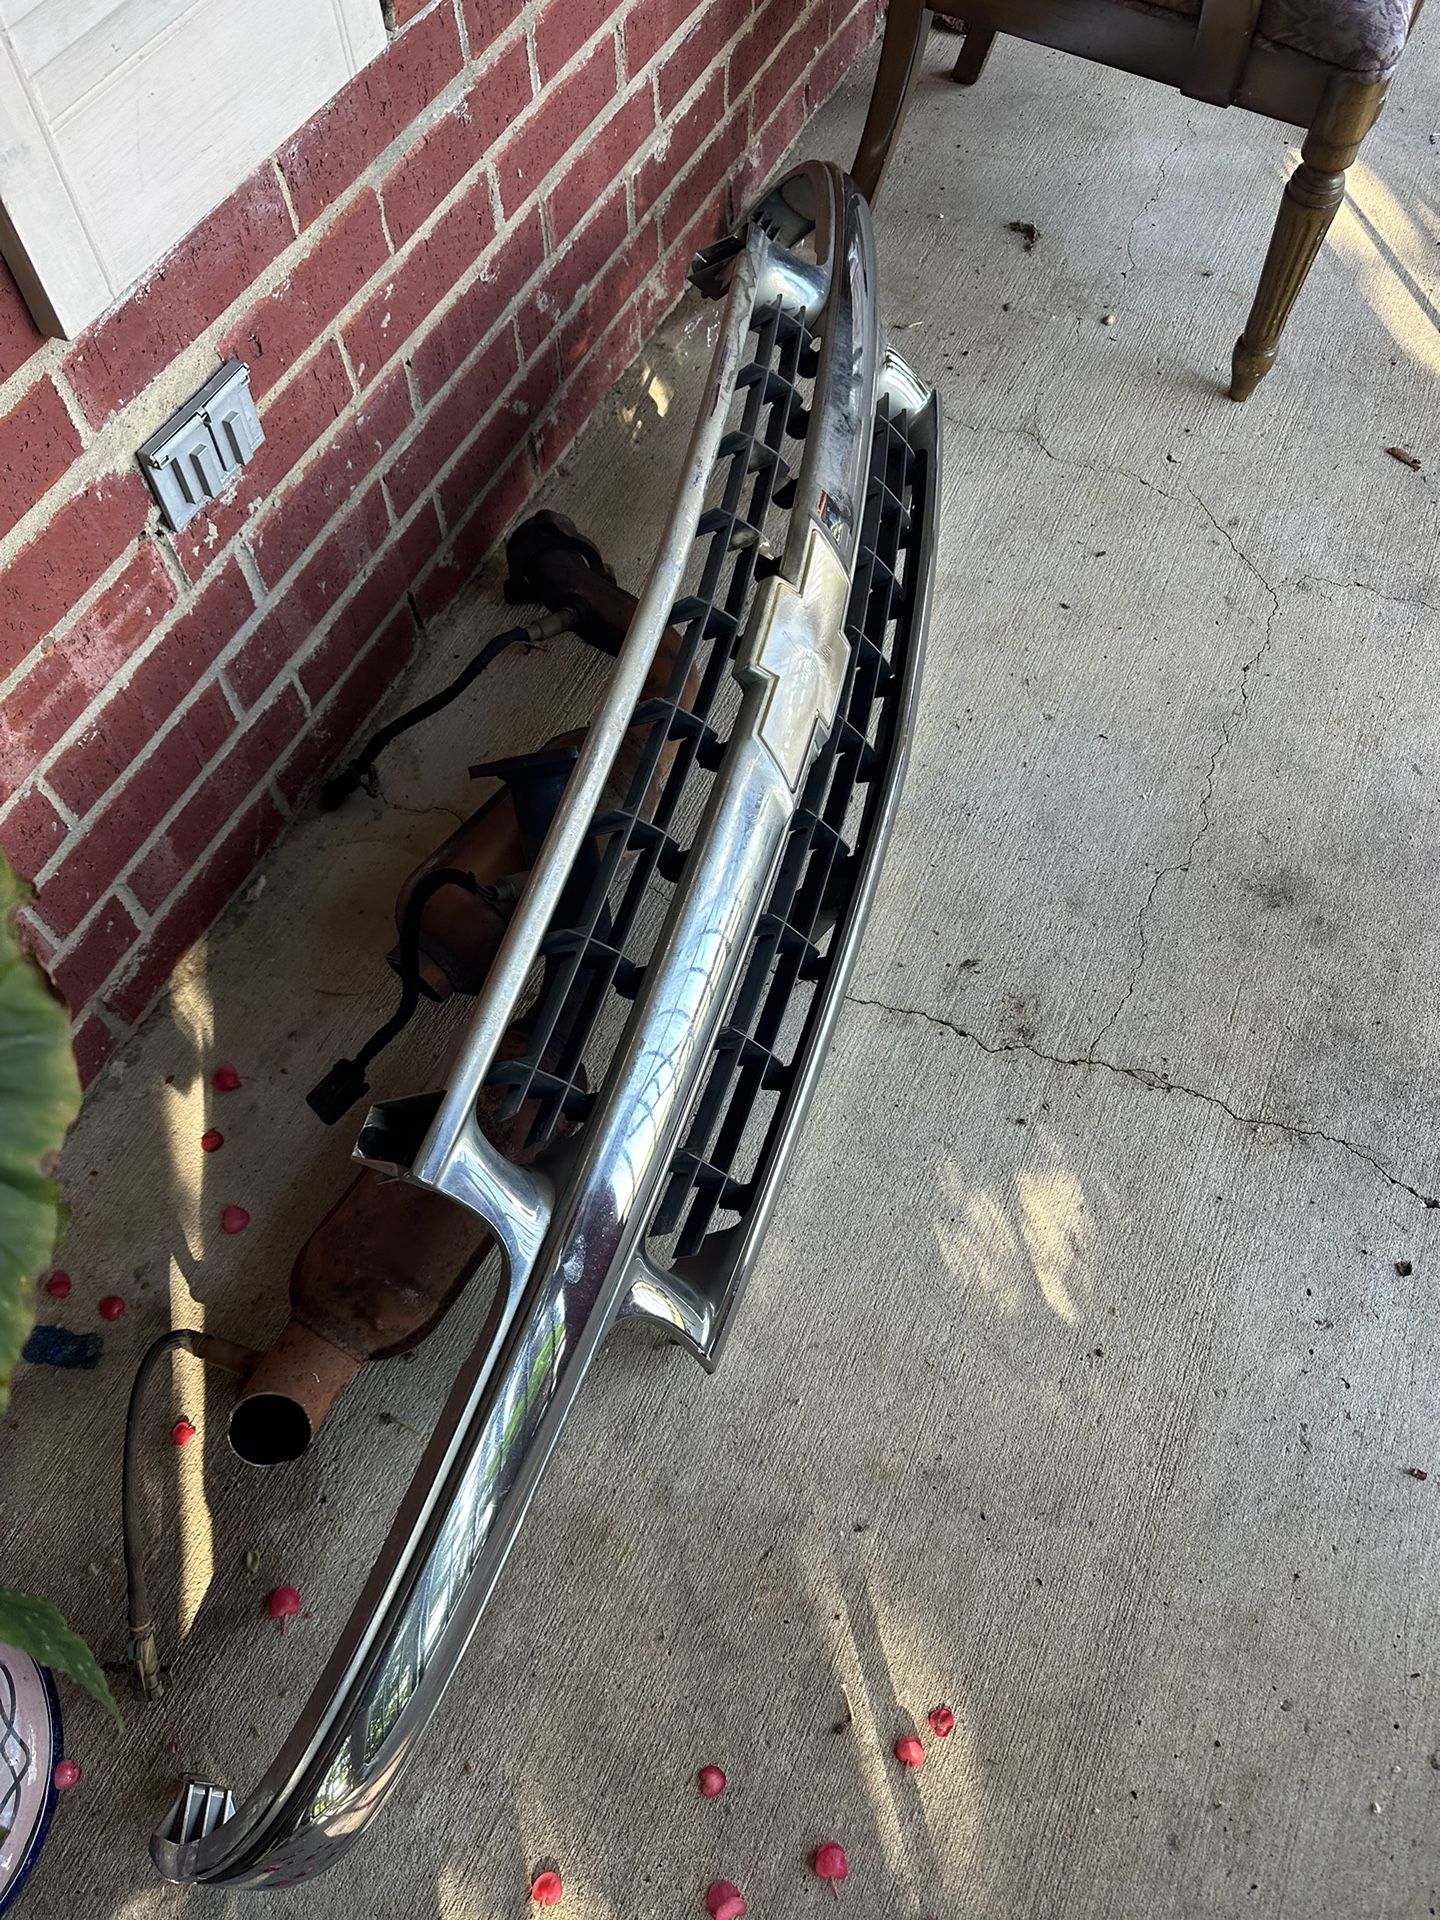 99-02 Chevy Grill